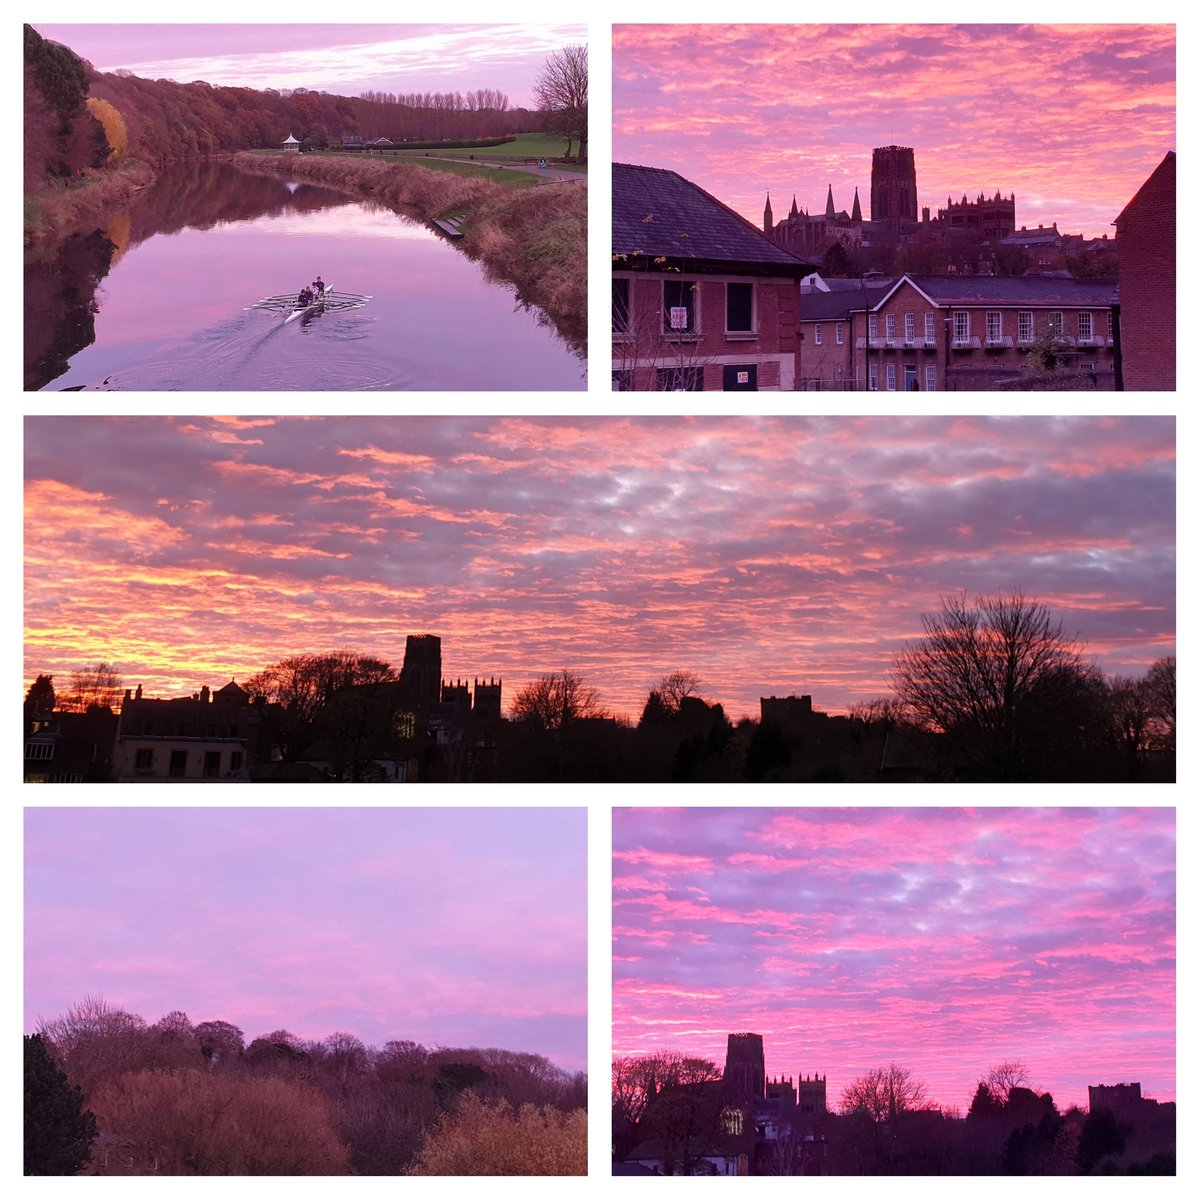 Palatinate purples. Durham. Cathedral and castle #Durham #sky #RiverWear @durhamcathedral @durham_uni @Durham_2025 #sunsets